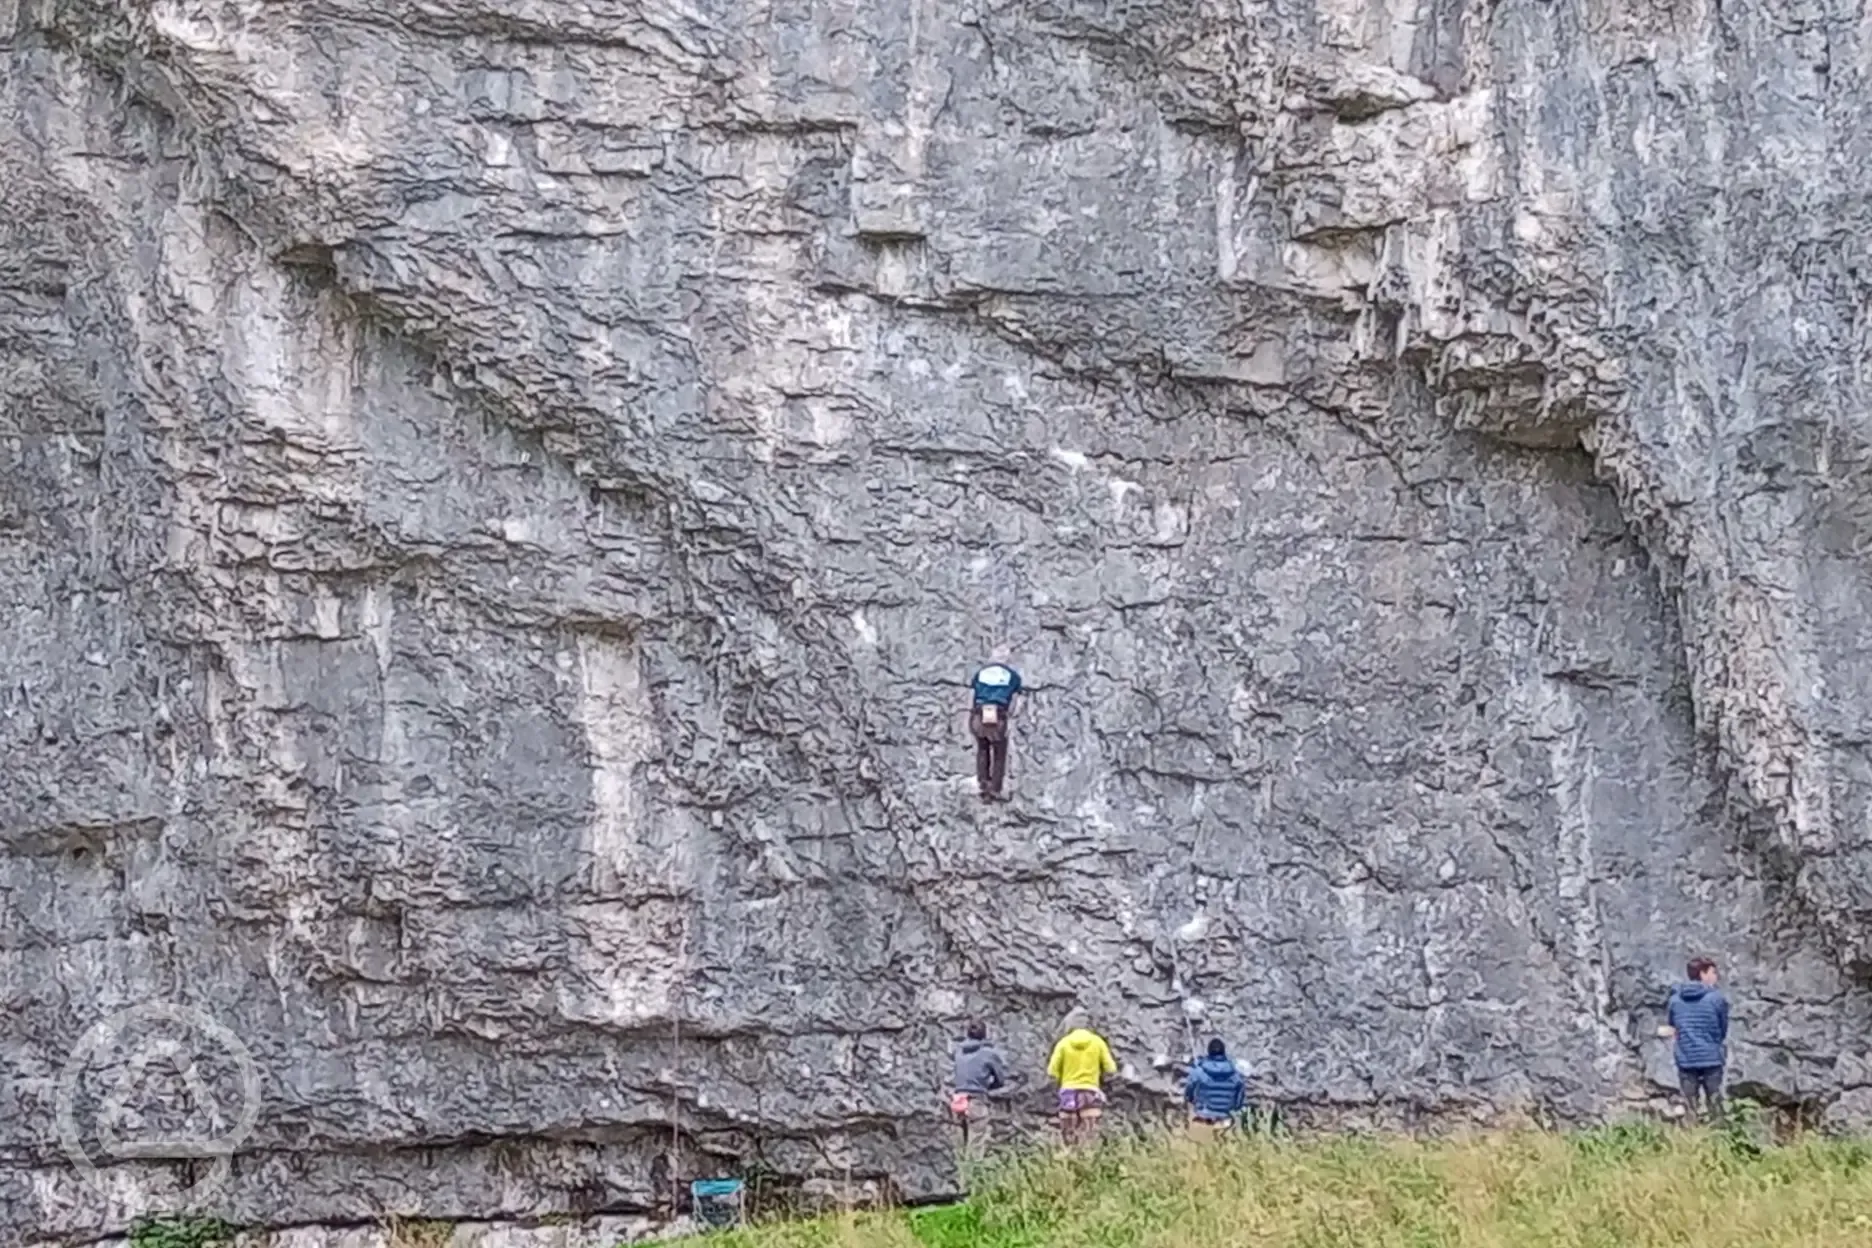 Kilnsey Crag - bouldering above camp site is also available